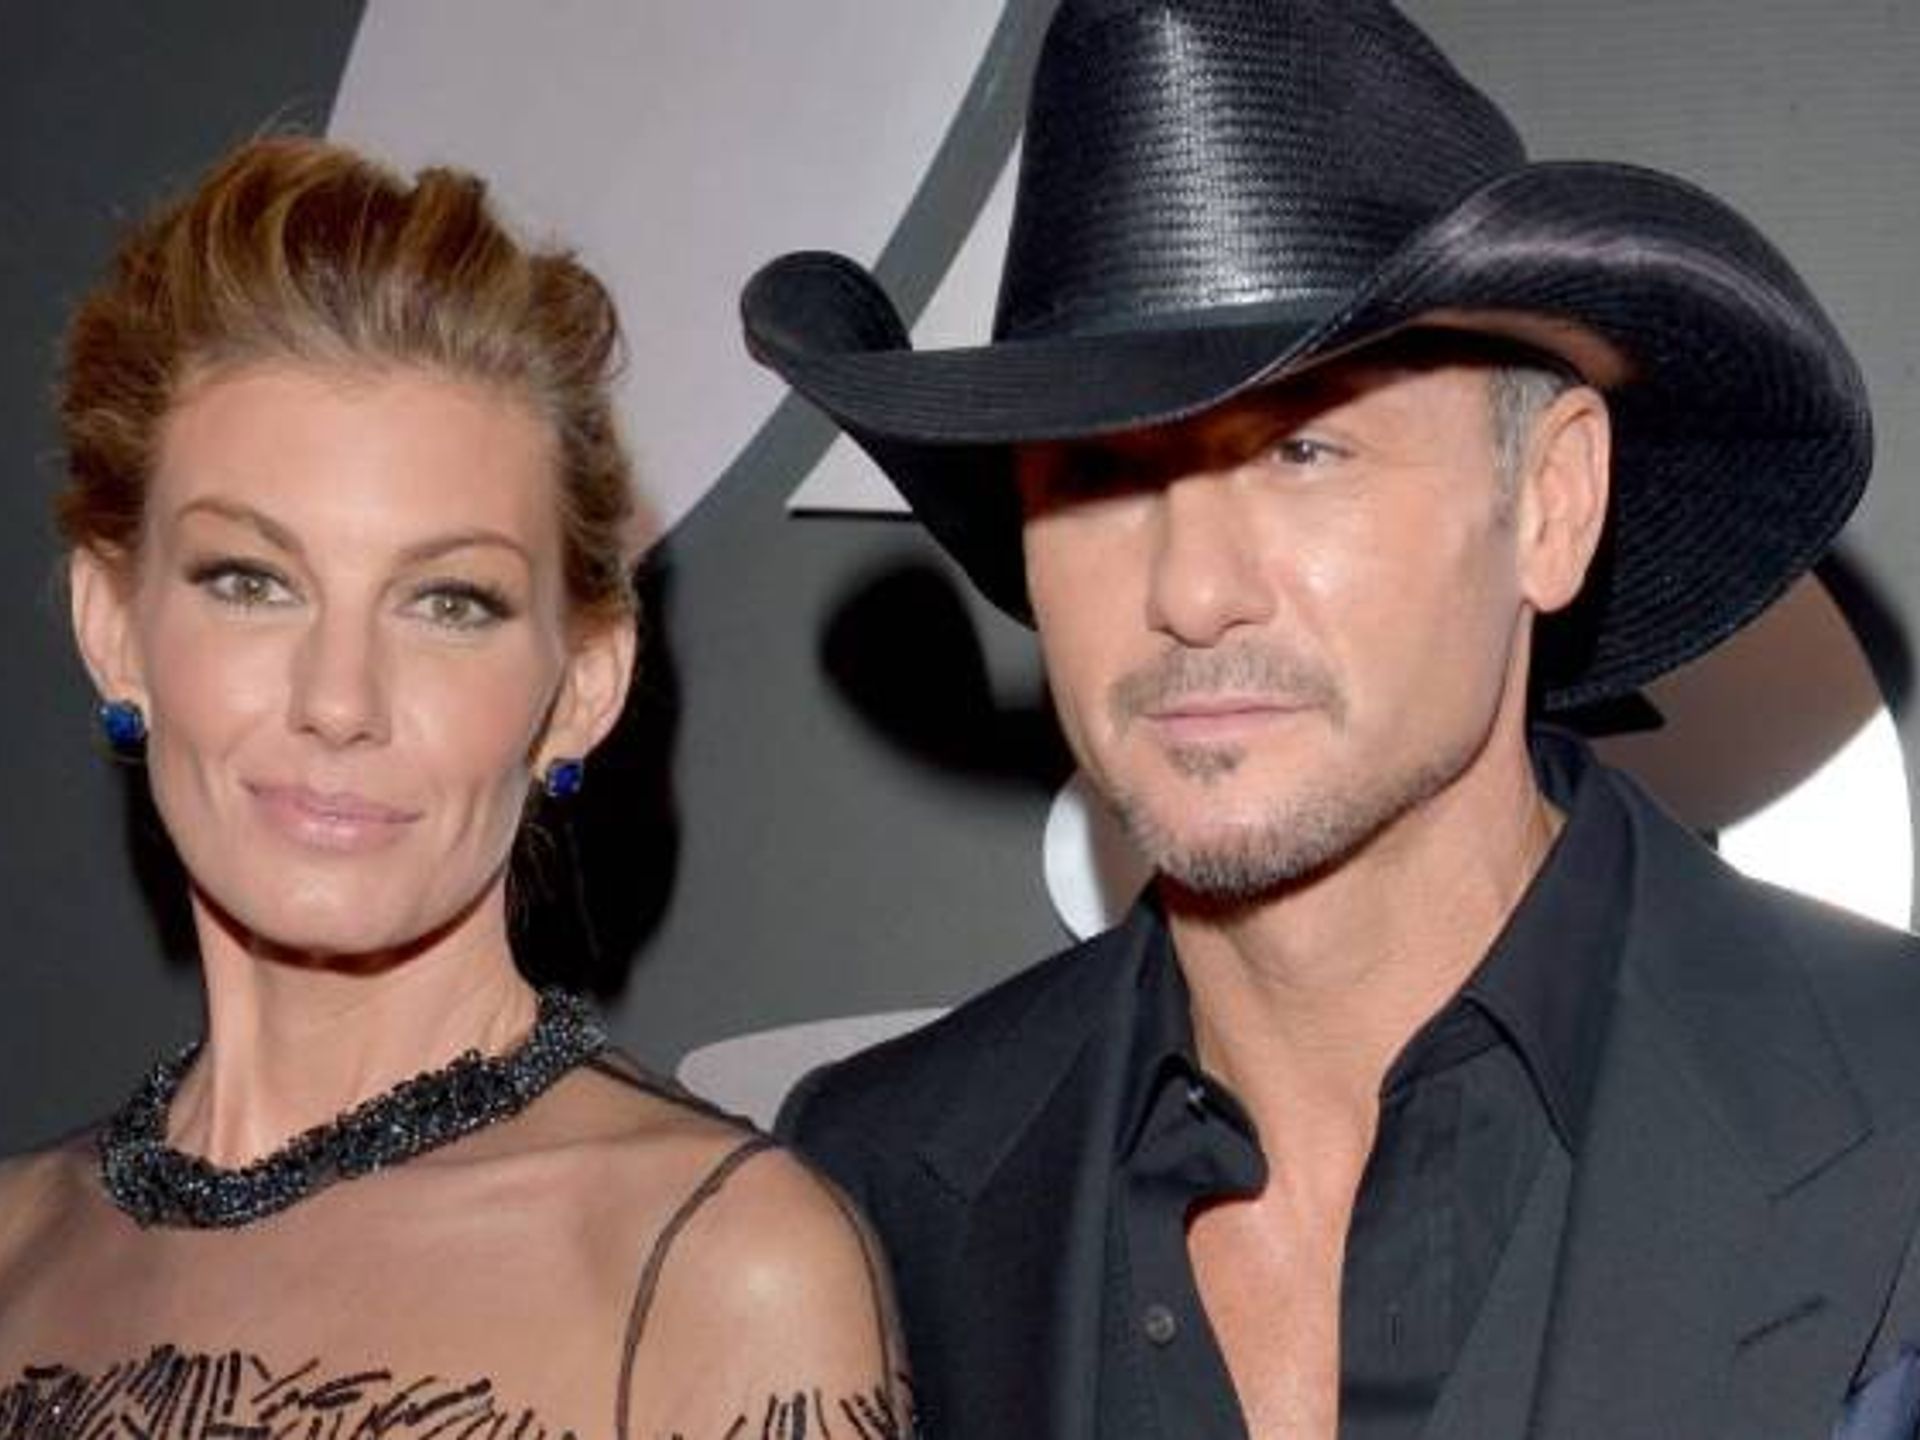 Ever Wonder Where Tim McGraw Got His Good Looks From?